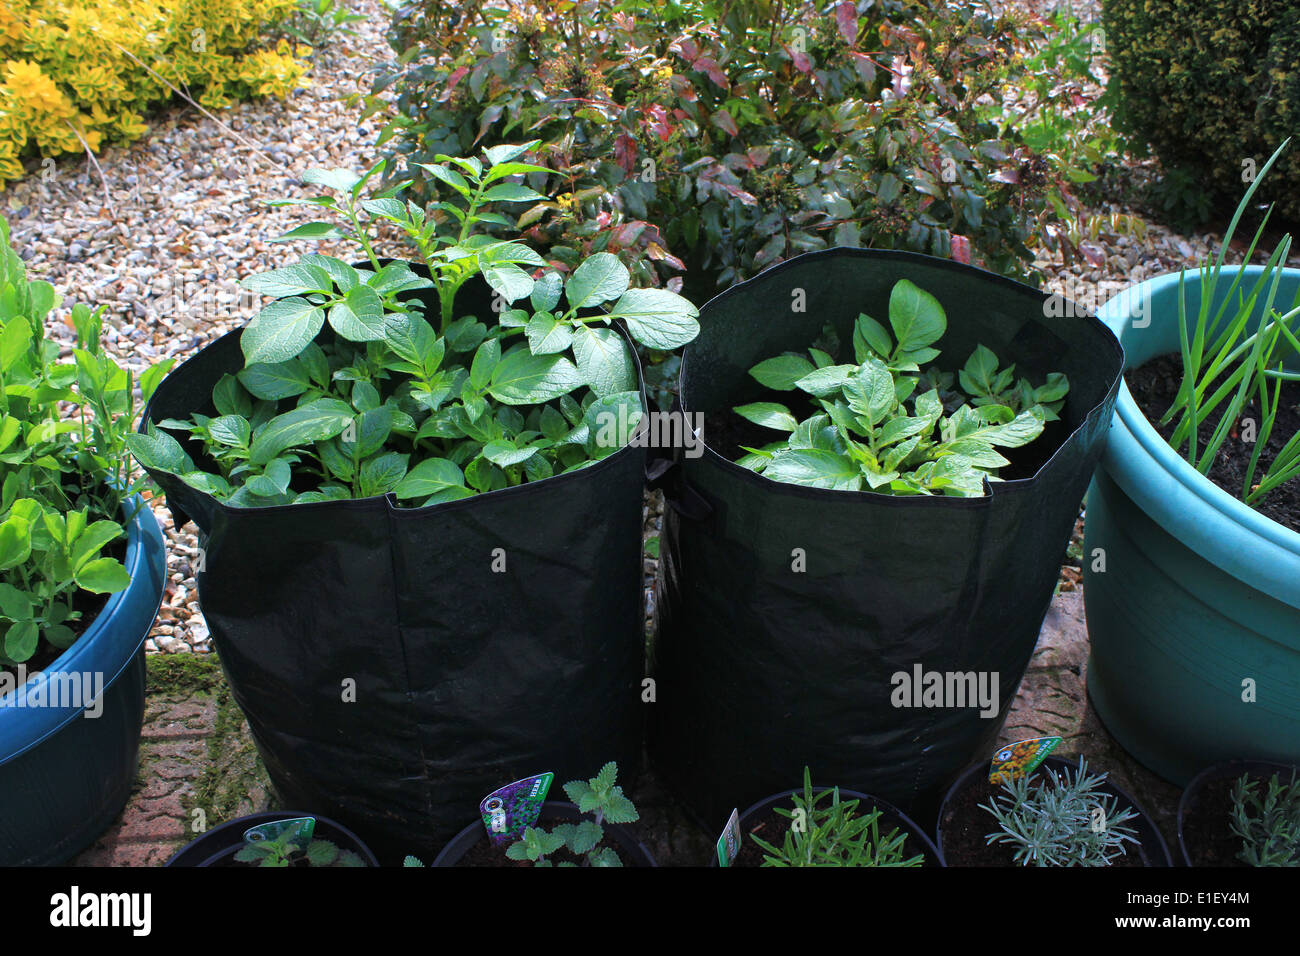 Growing Potatoes in Plastic Bags the Cheap & Easy Way 